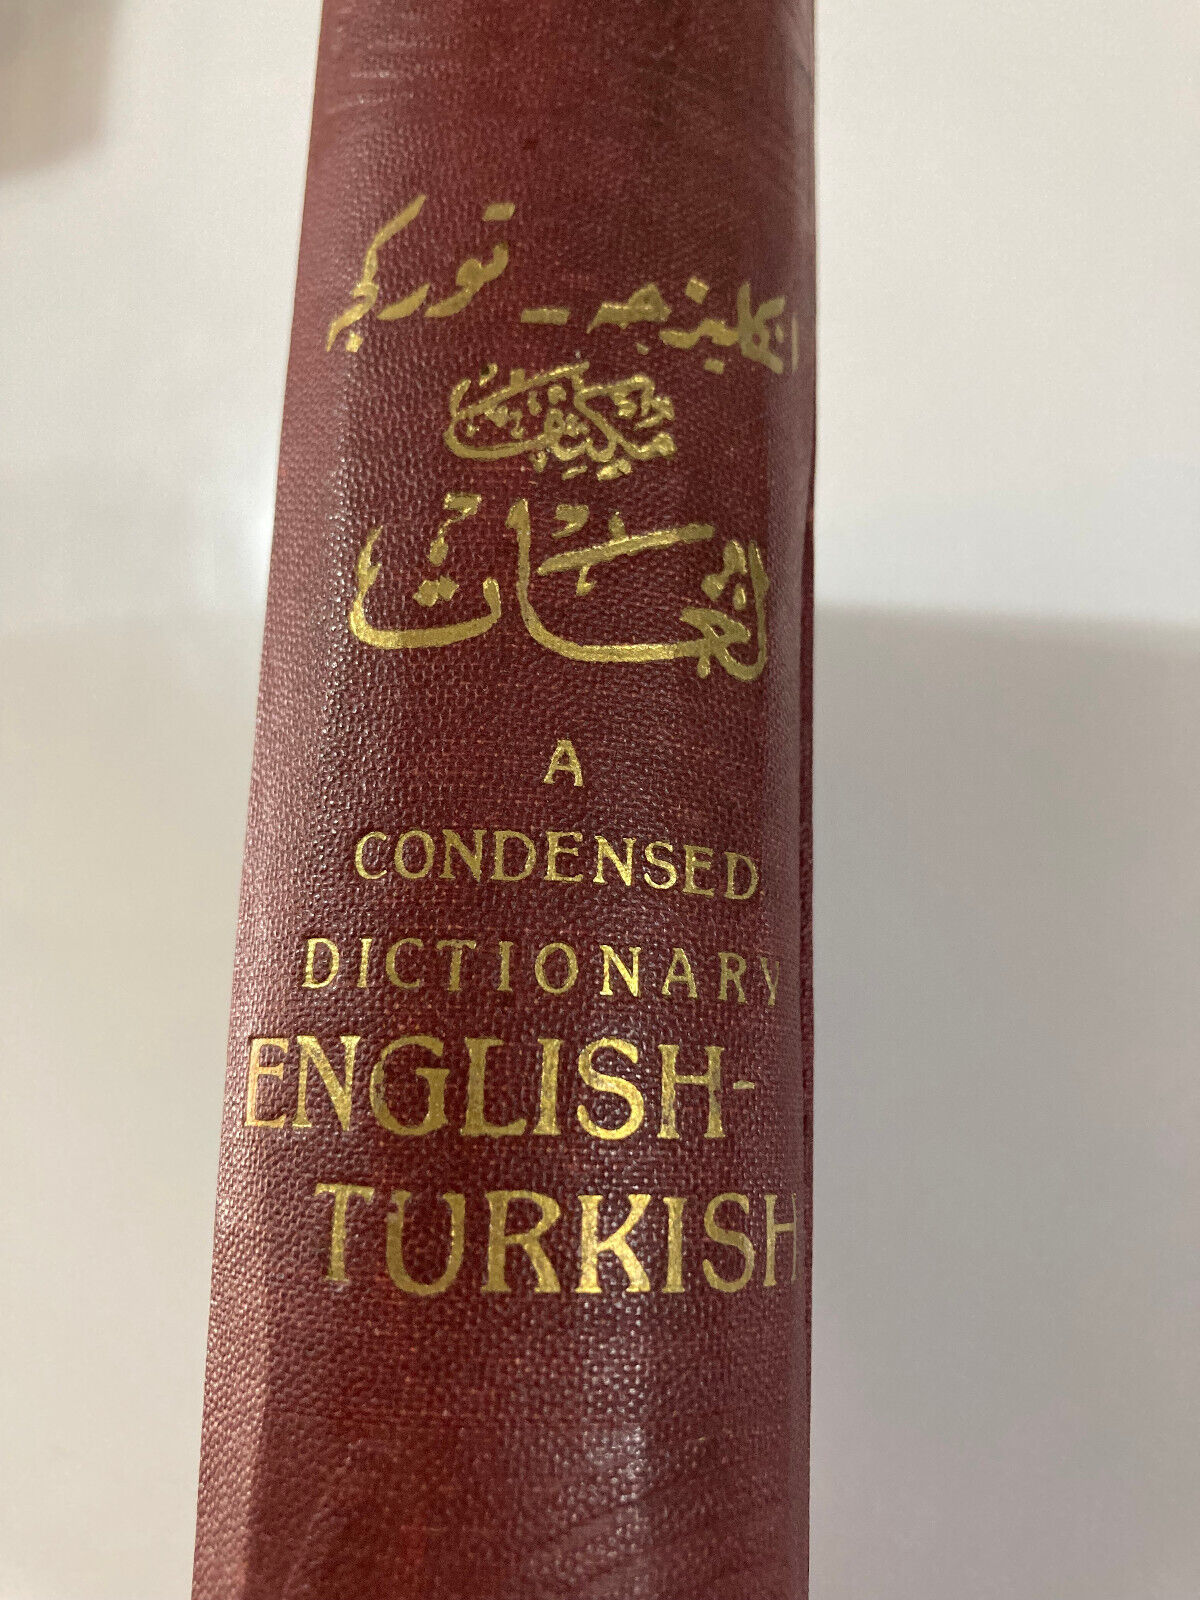 A Condensed Dictionary English-Ottoman Turkish 1924 Istanbul Vahid Bey Fine Bind